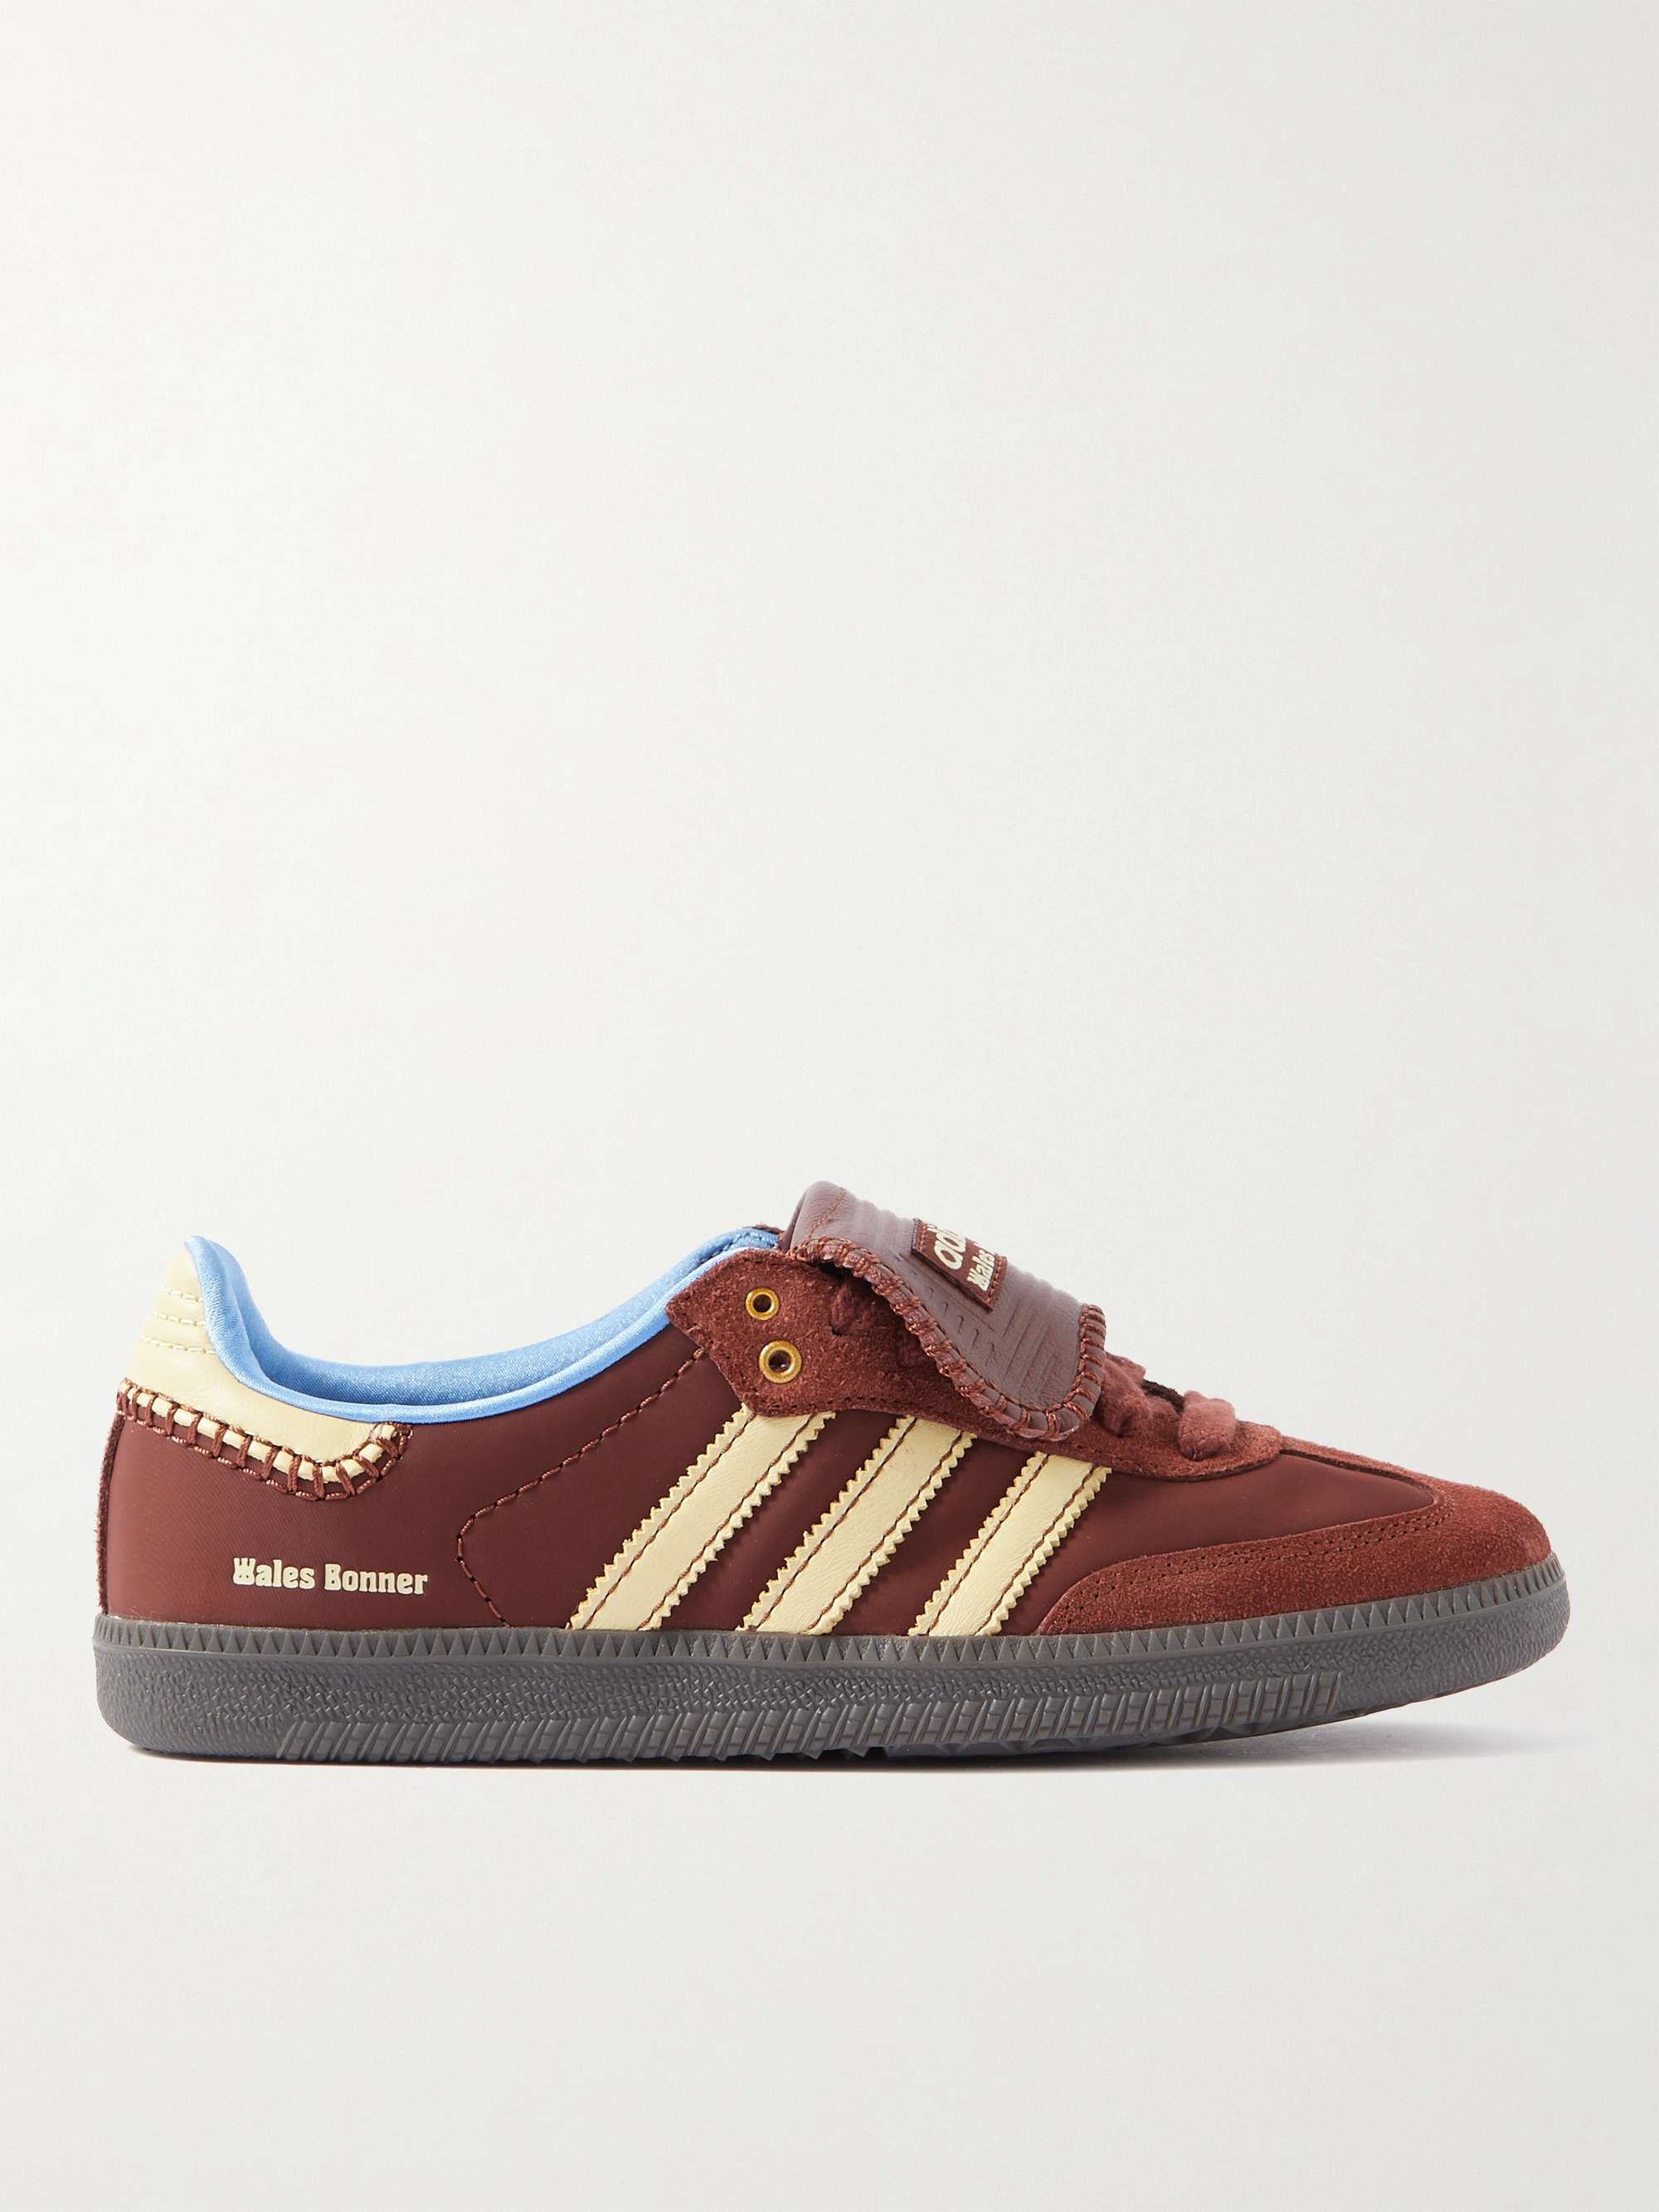 ADIDAS CONSORTIUM + Wales Bonner Samba Suede-Trimmed Leather Sneakers for  Men | MR PORTER